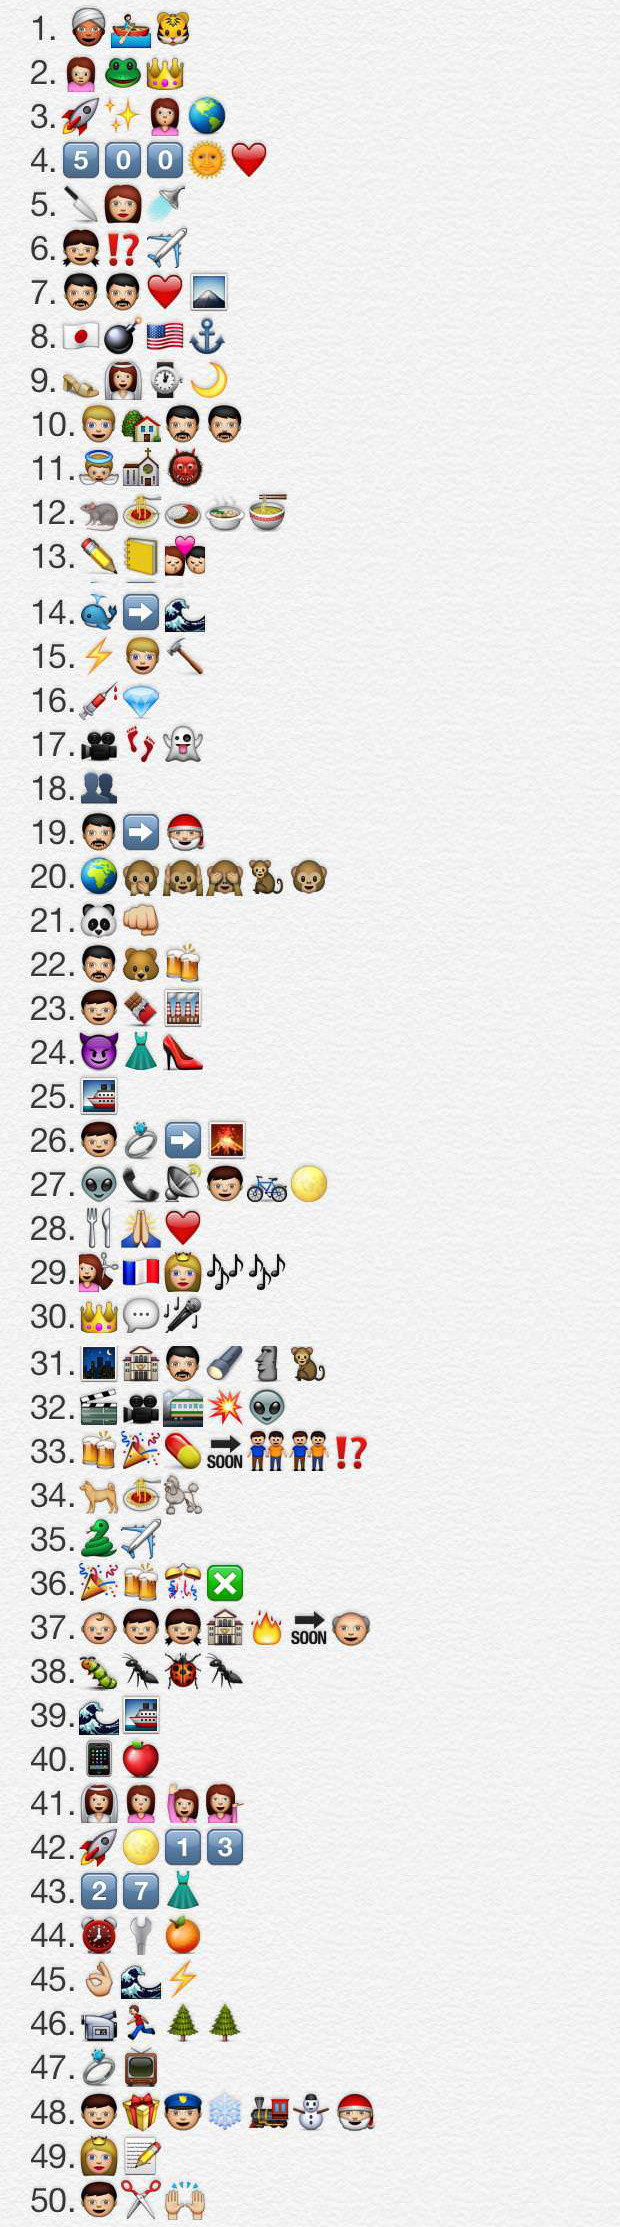 Guess The 50 Movie Names From Emoticons And Smileys Memolition The latest tweets from the emoji movie (@emojimovie). memolition